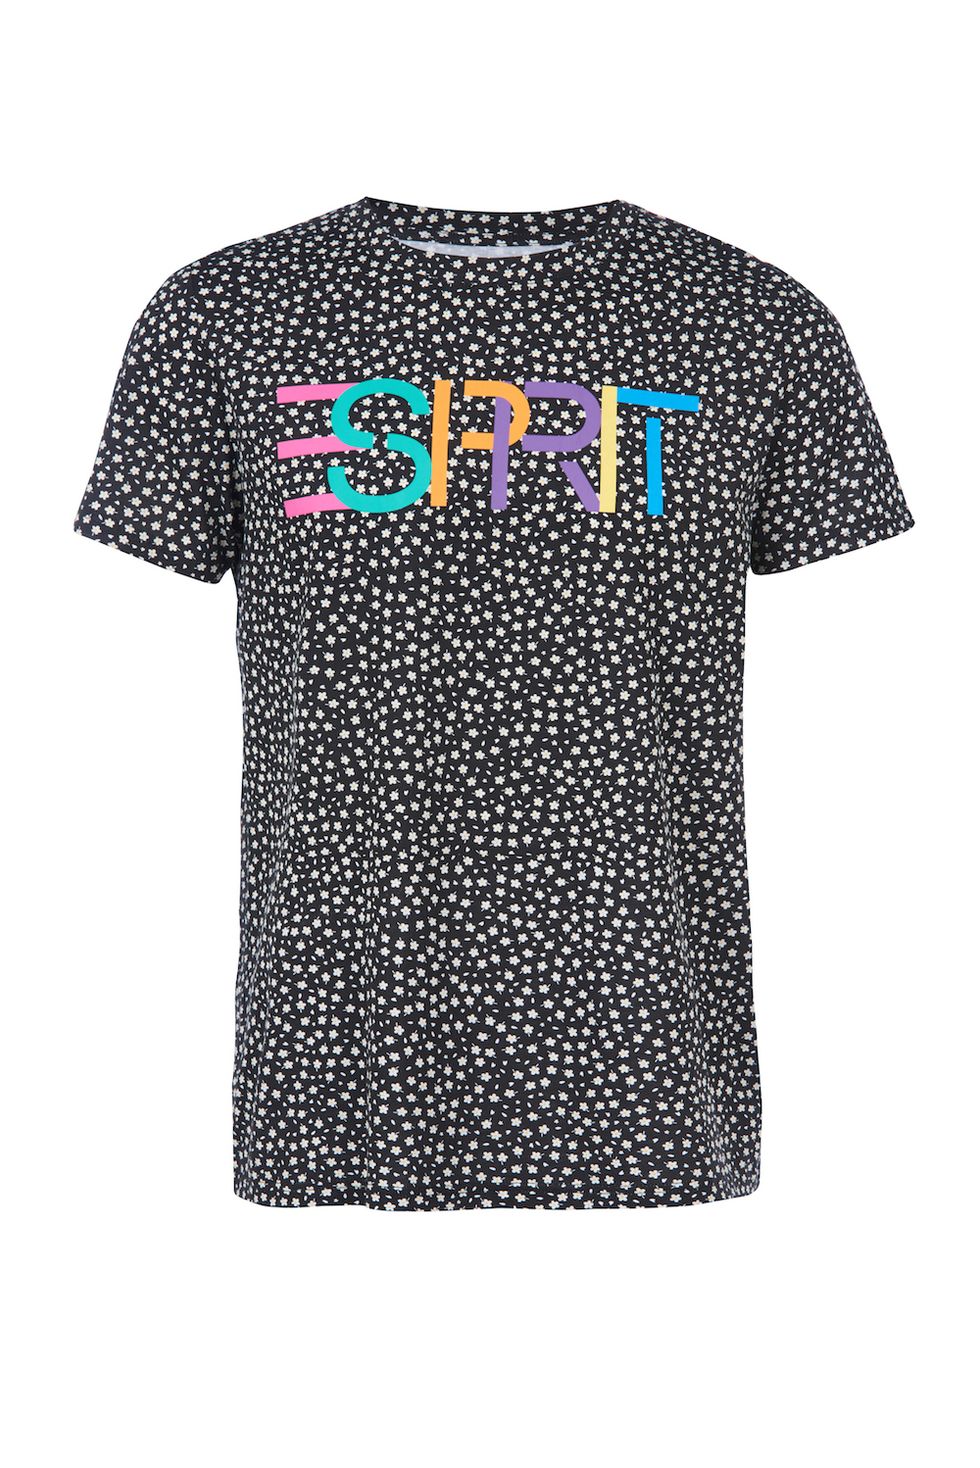 Esprit Opening Ceremony Launch Capsule Collection